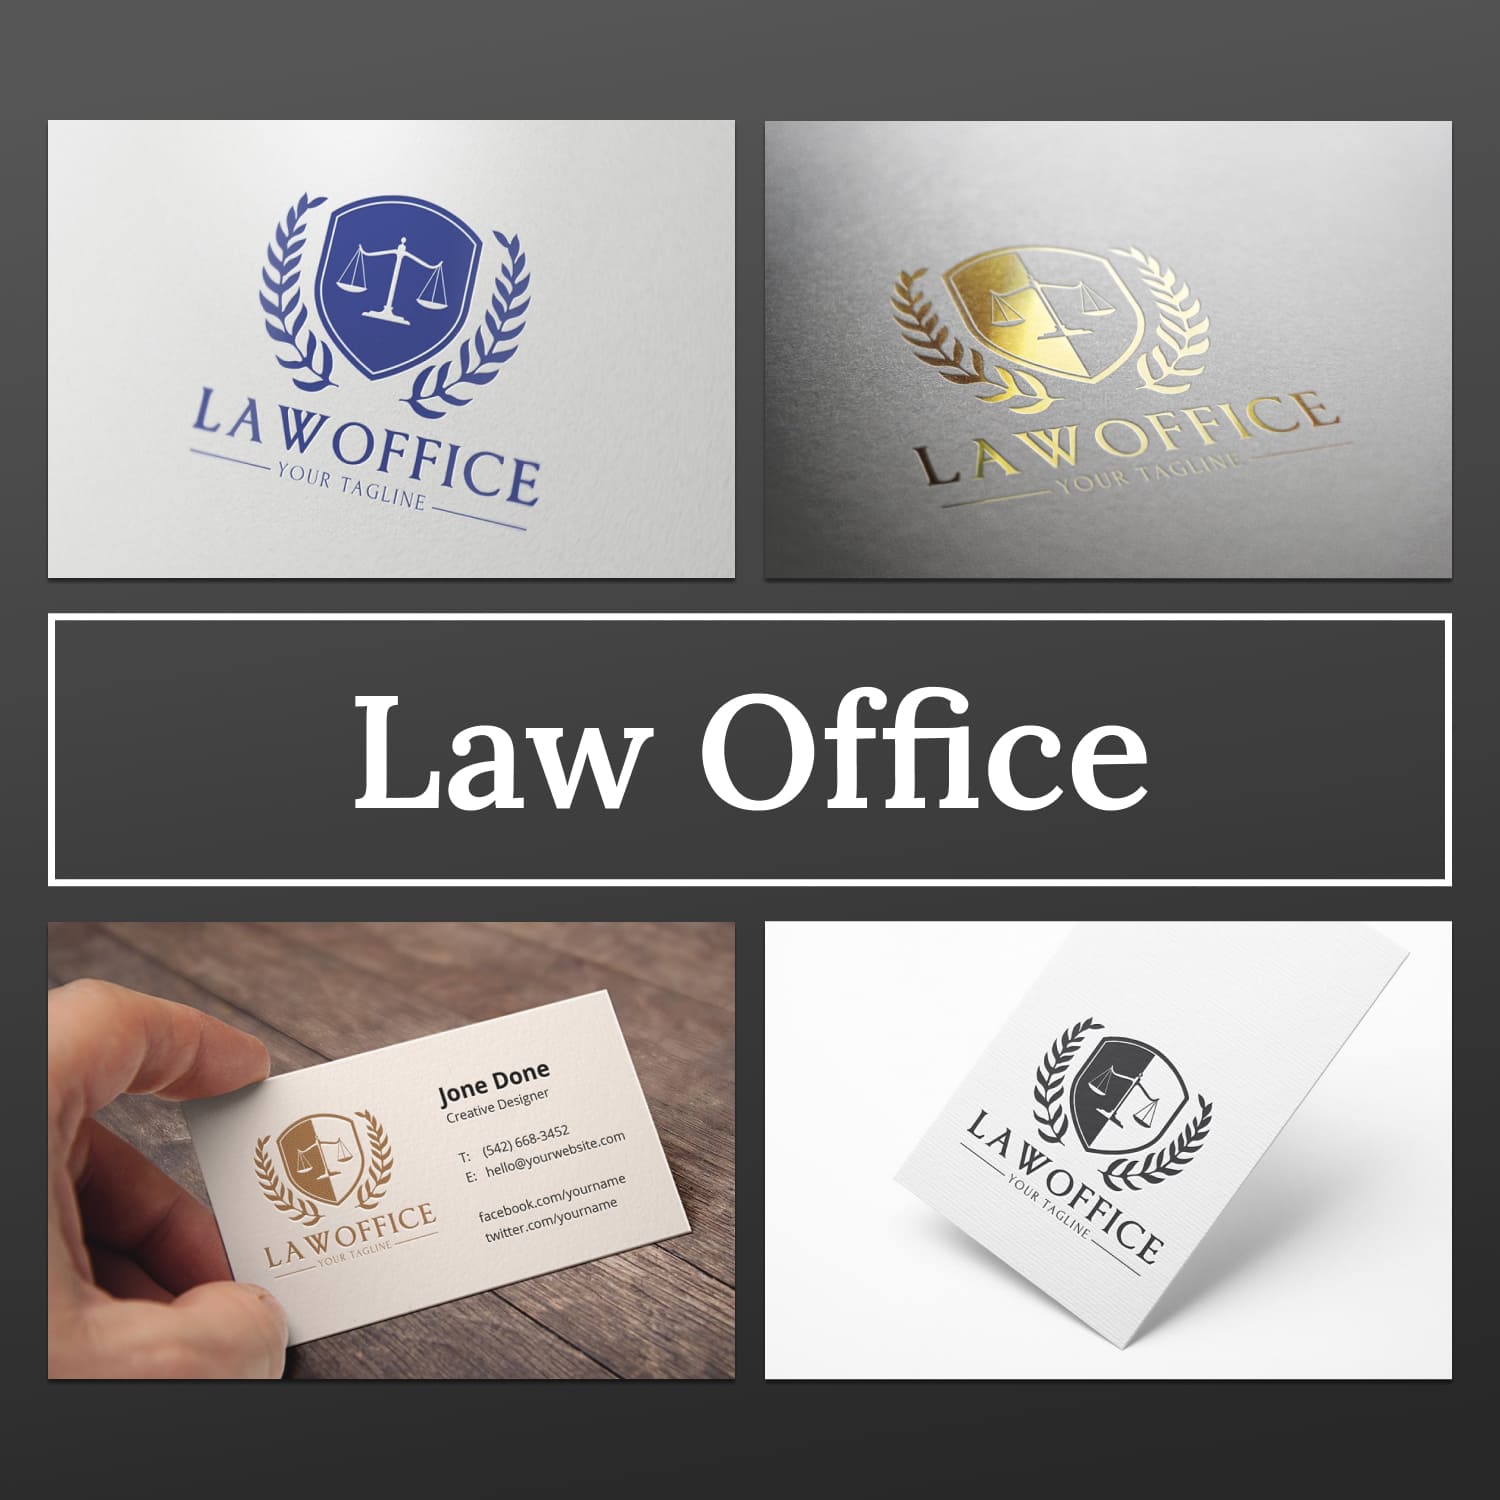 Law Office Logotype Template cover image.